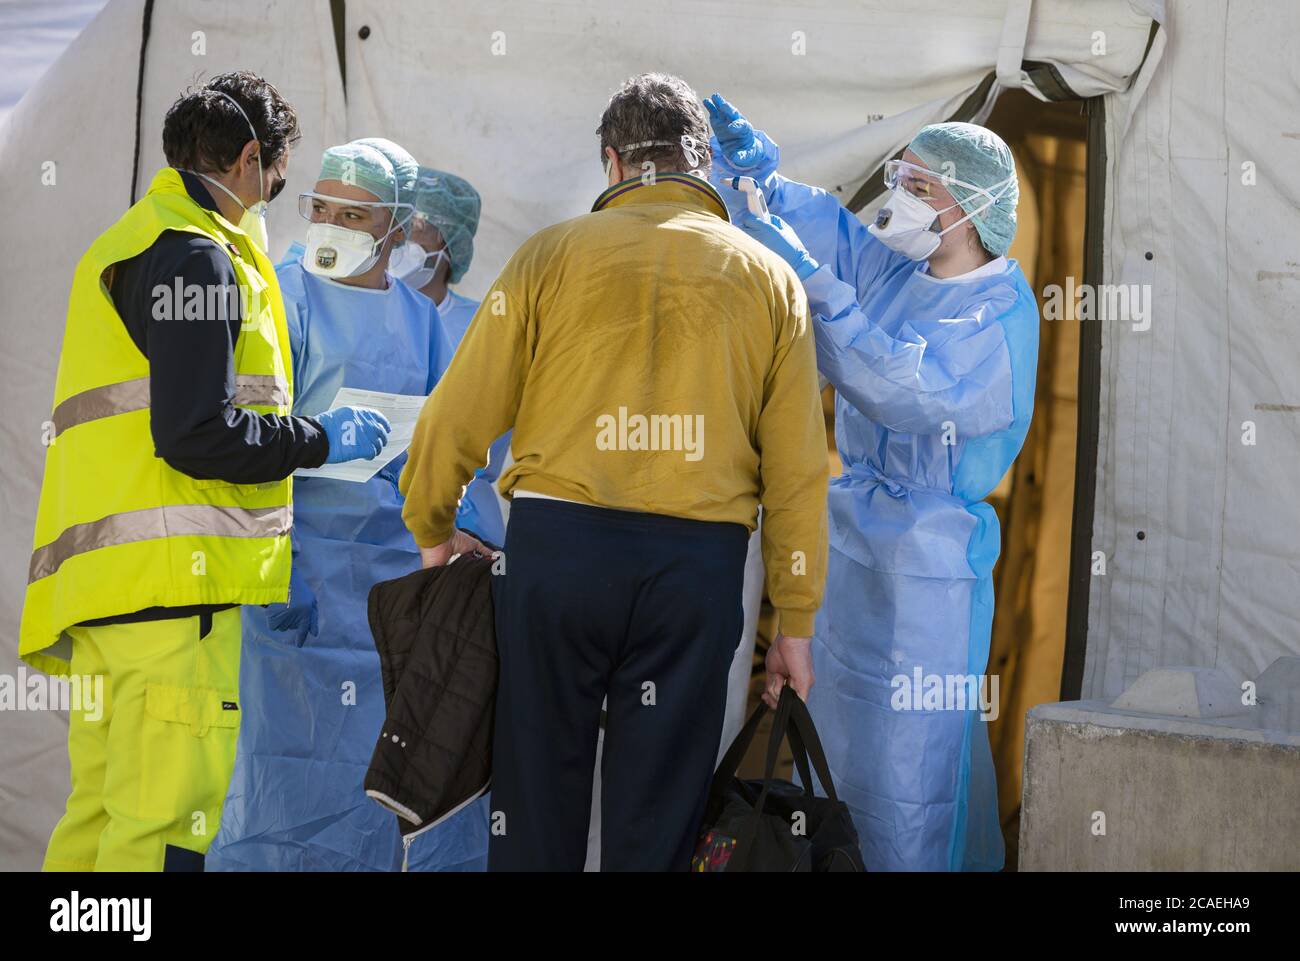 Alert pandemic Covid-19. Triage hospital tent for the first AID for patient infected with Corona Virus. Doctors check the patiences at the entrance. Stock Photo